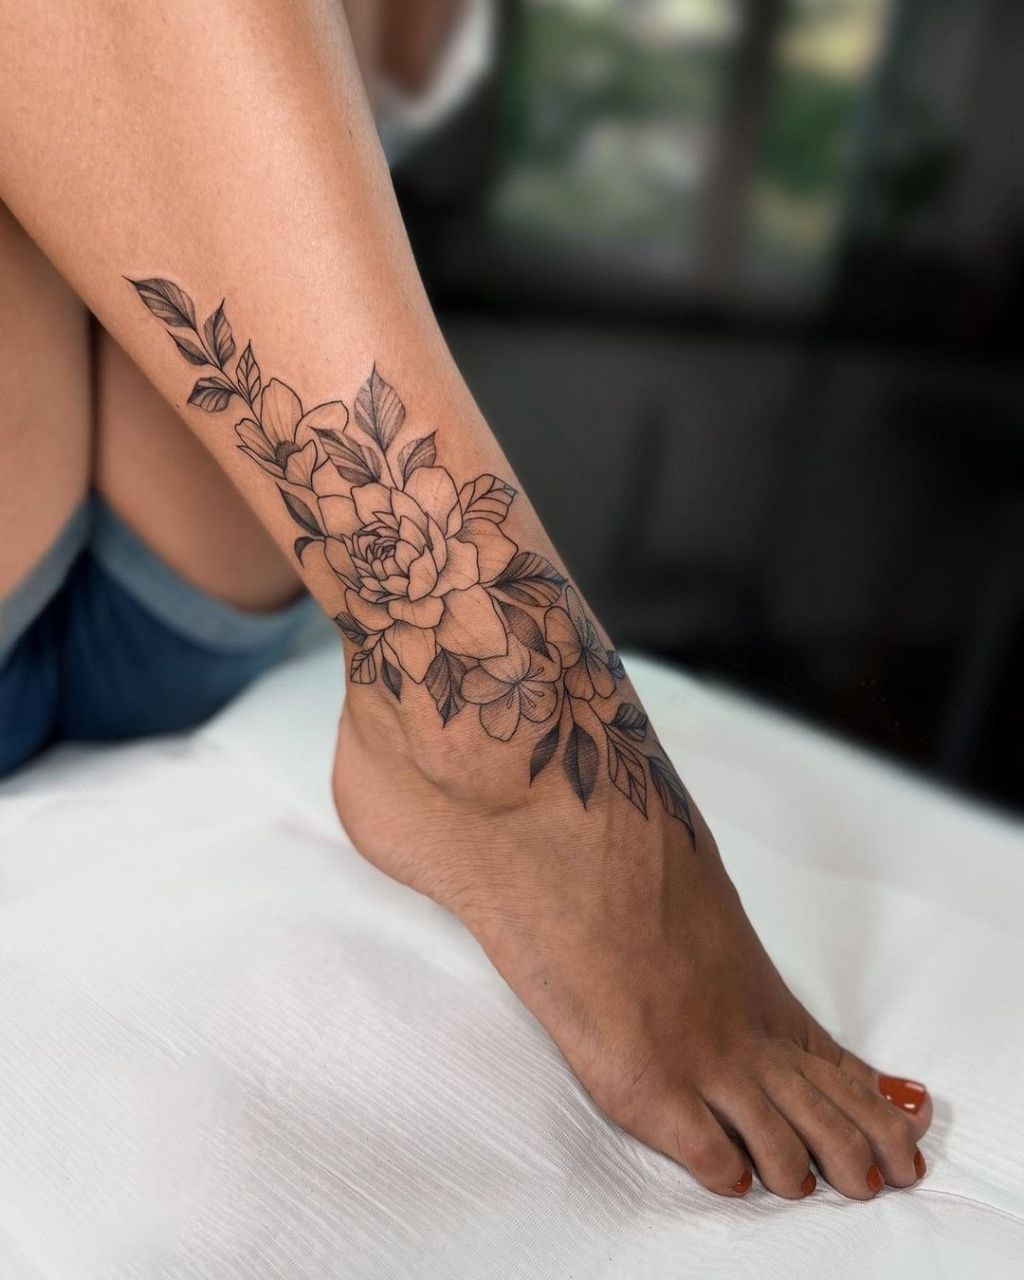 Foot Tattoo Ideas To Sweep You Off Your Feet  Stories and Ink